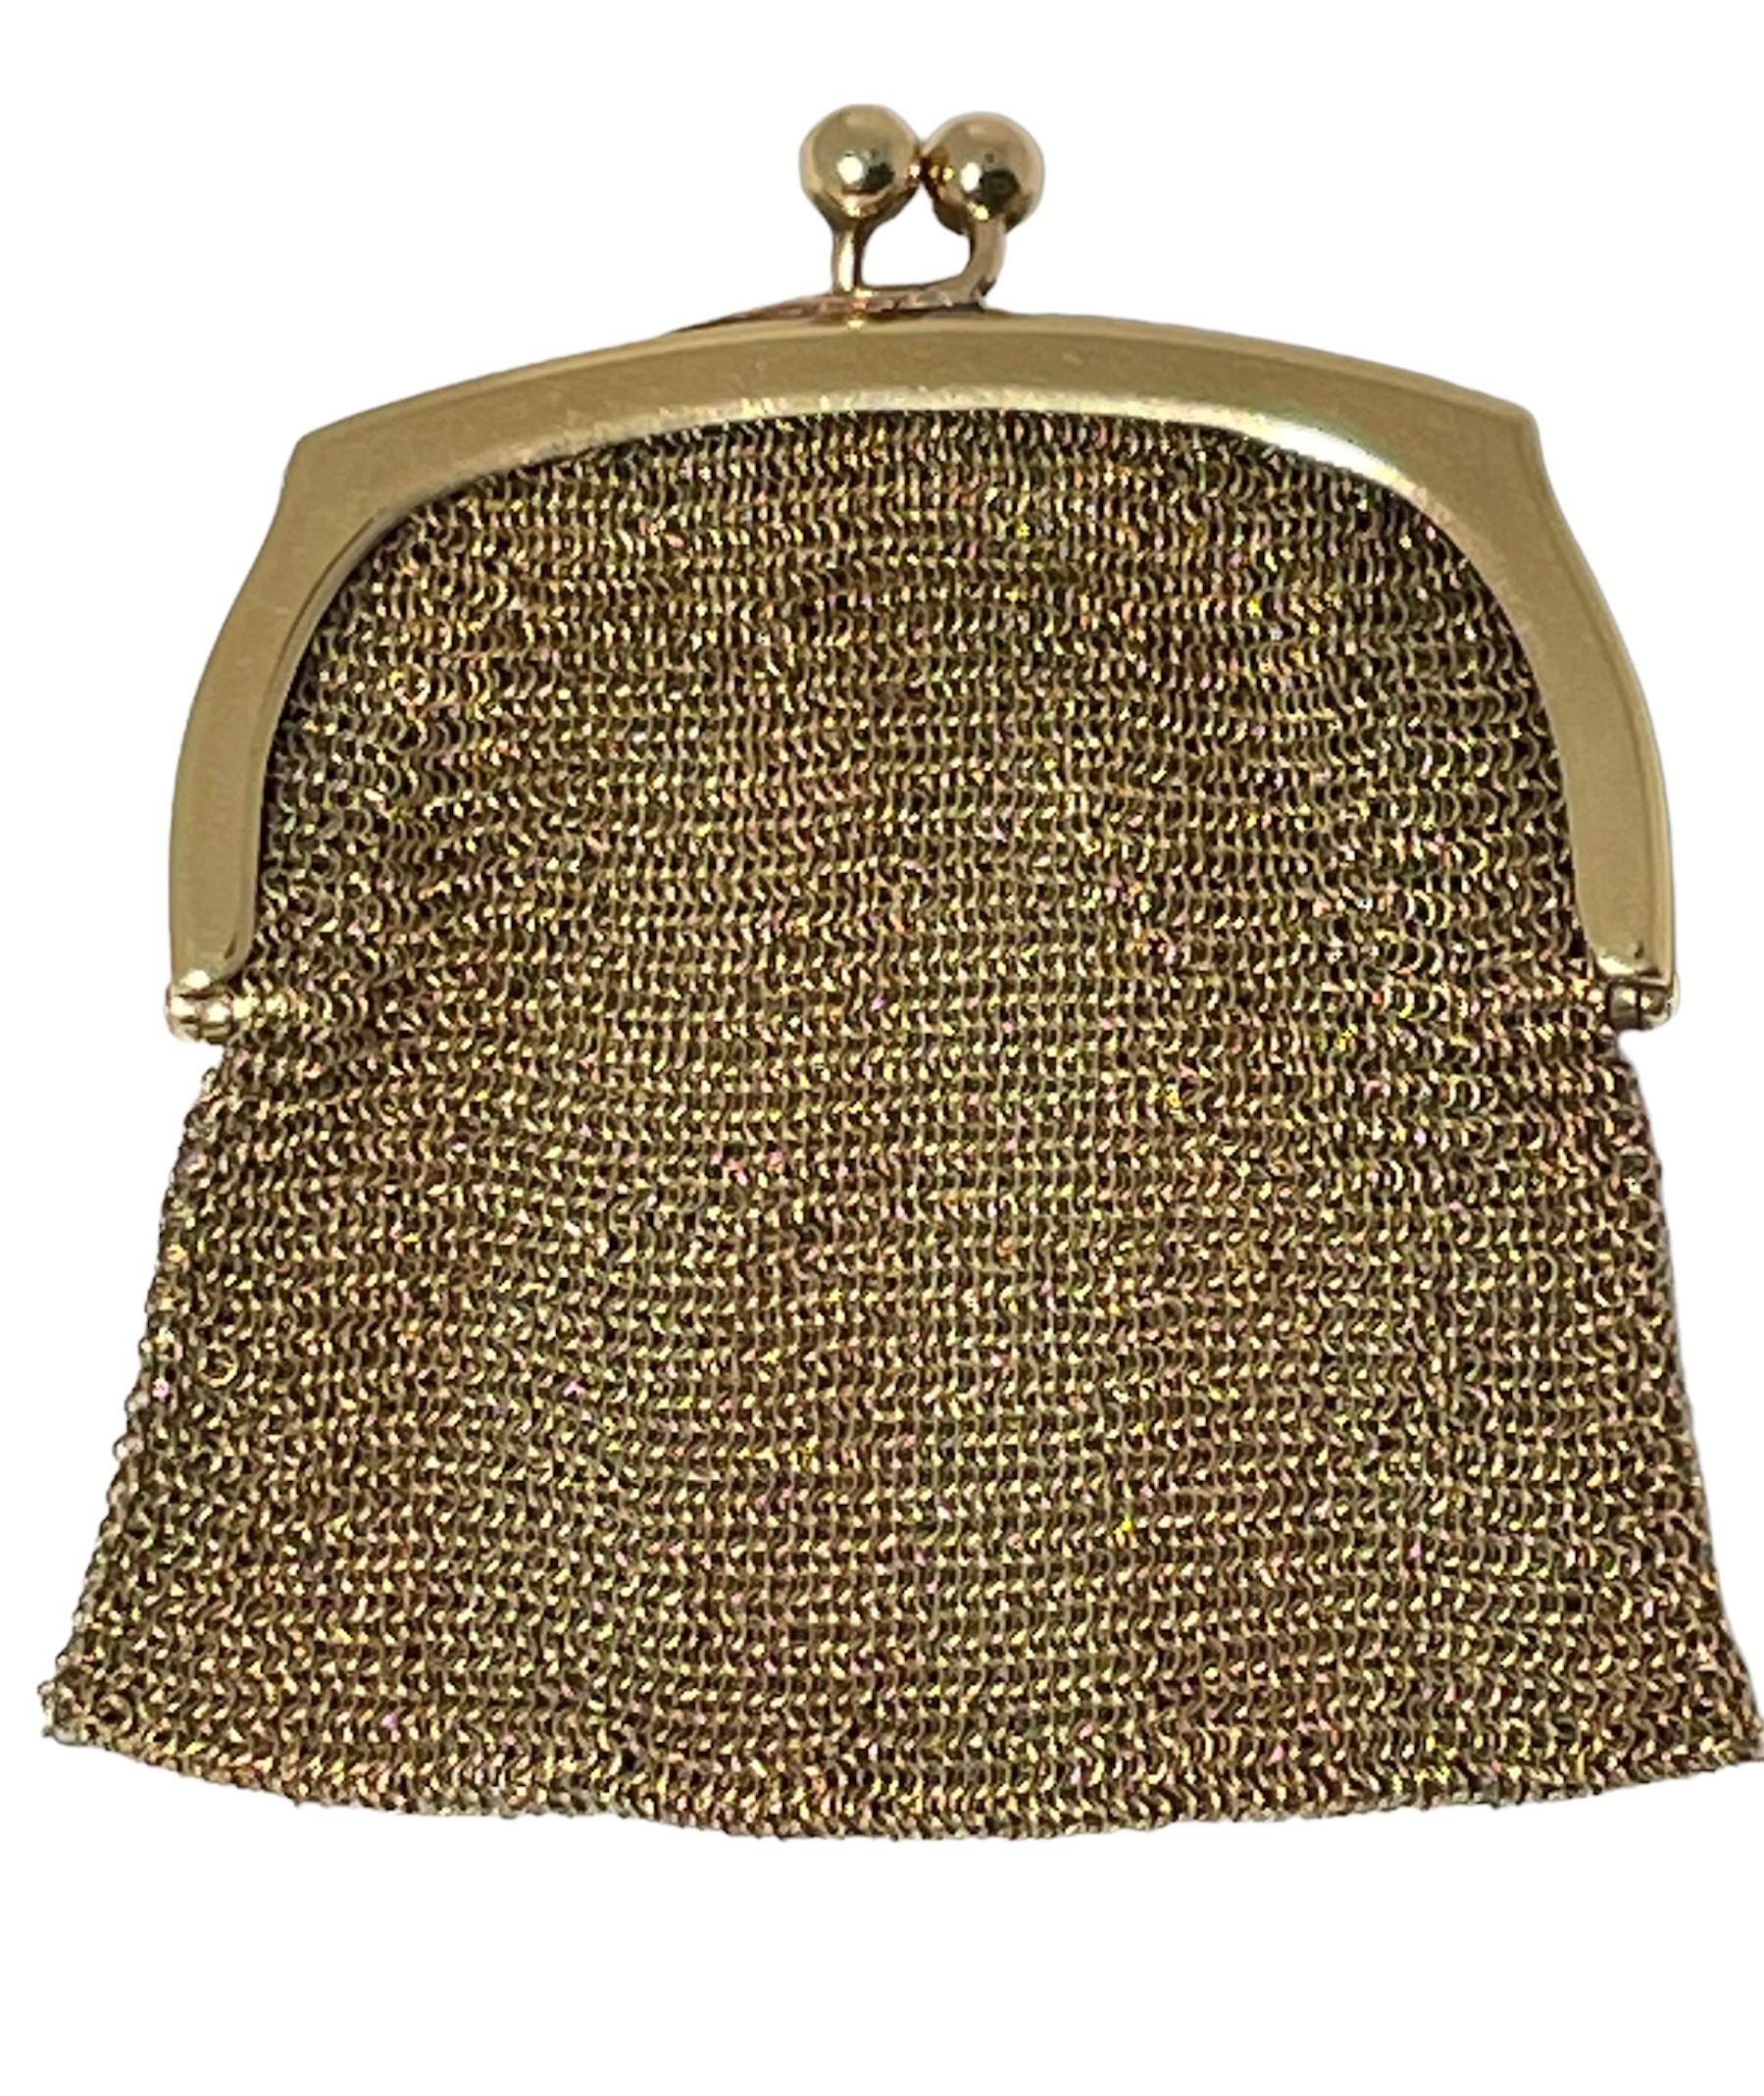 This is an 18kt gold flat mesh petite coin purse. It is made of multiples interwoven tiny rings. It closes and opens easily with a kiss-lock clasp. It is a shiny, flexible and easy to carry purse. Inside one of the gold upper border frame, it is